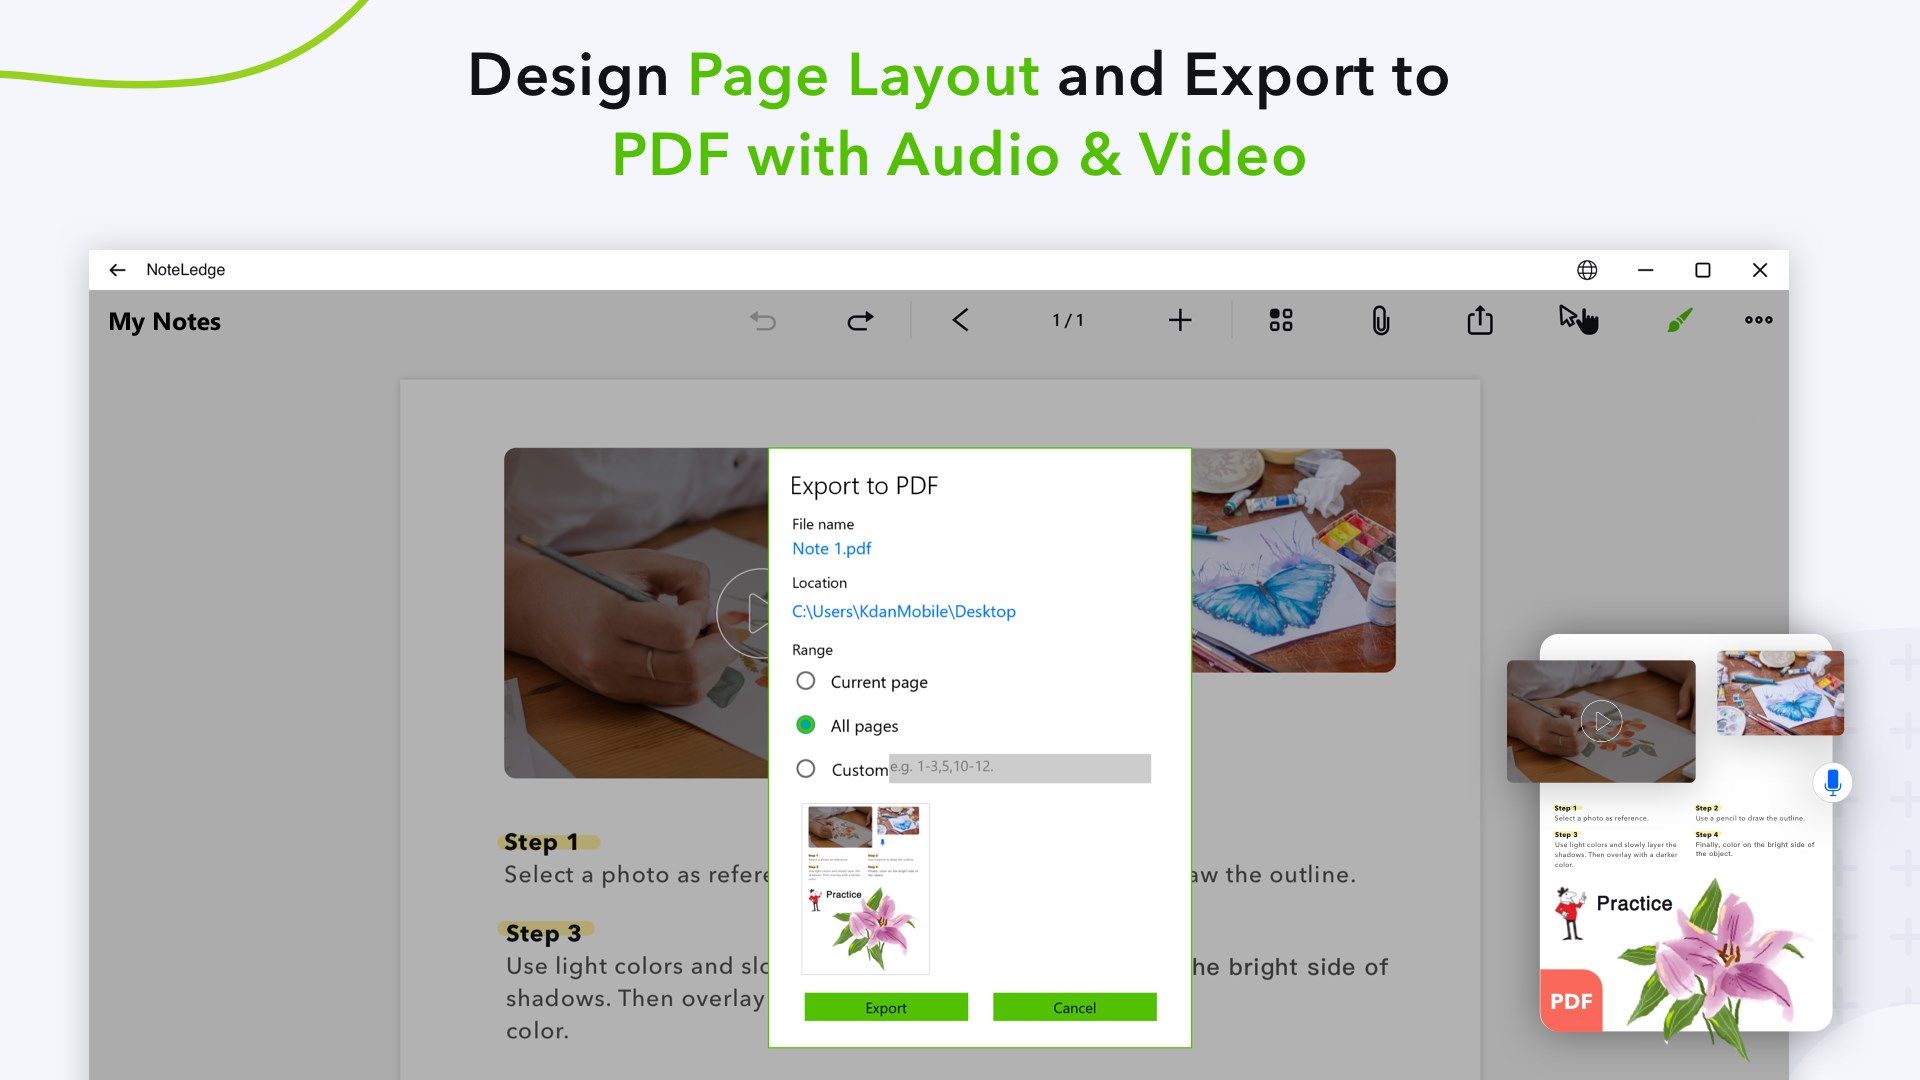 Design Page Layout and Export to PDF with Audio & Video